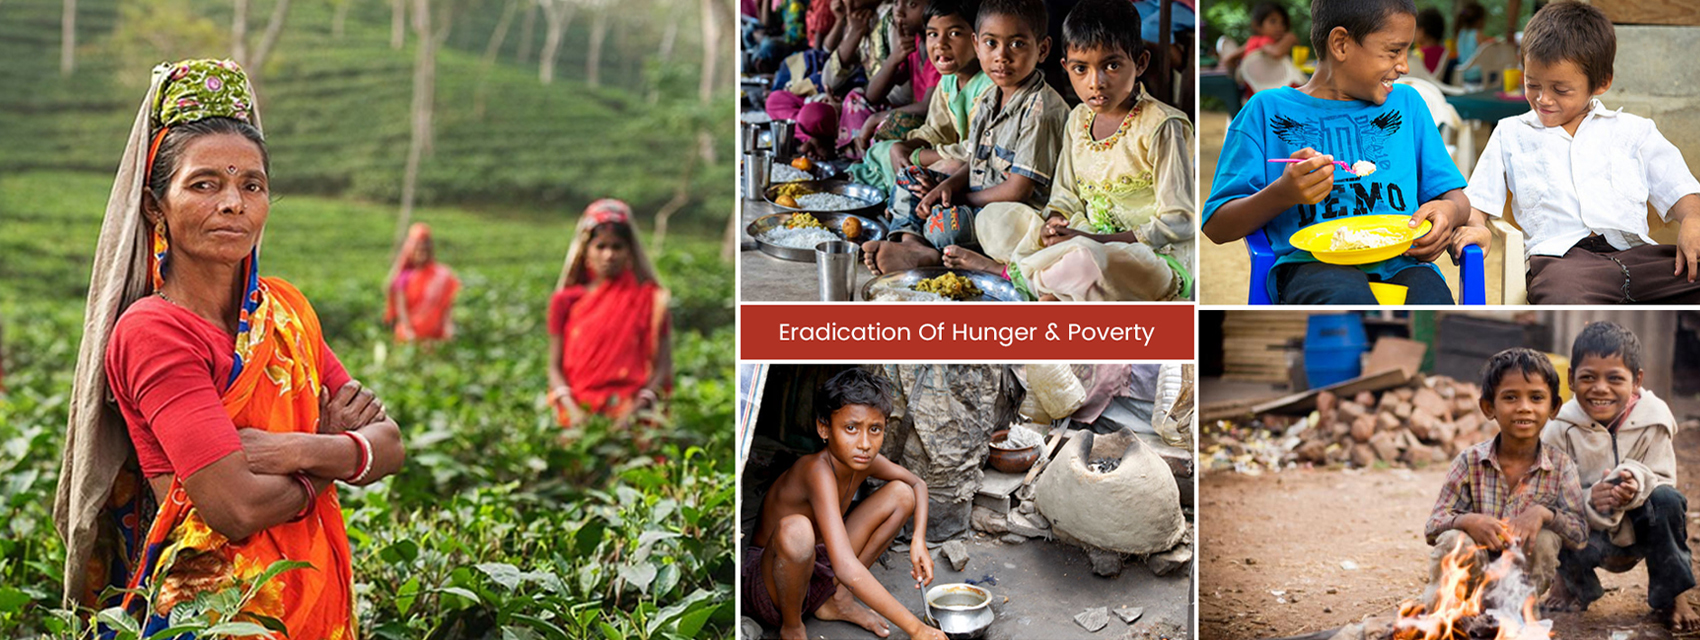 Eradication of Hunger and Poverty